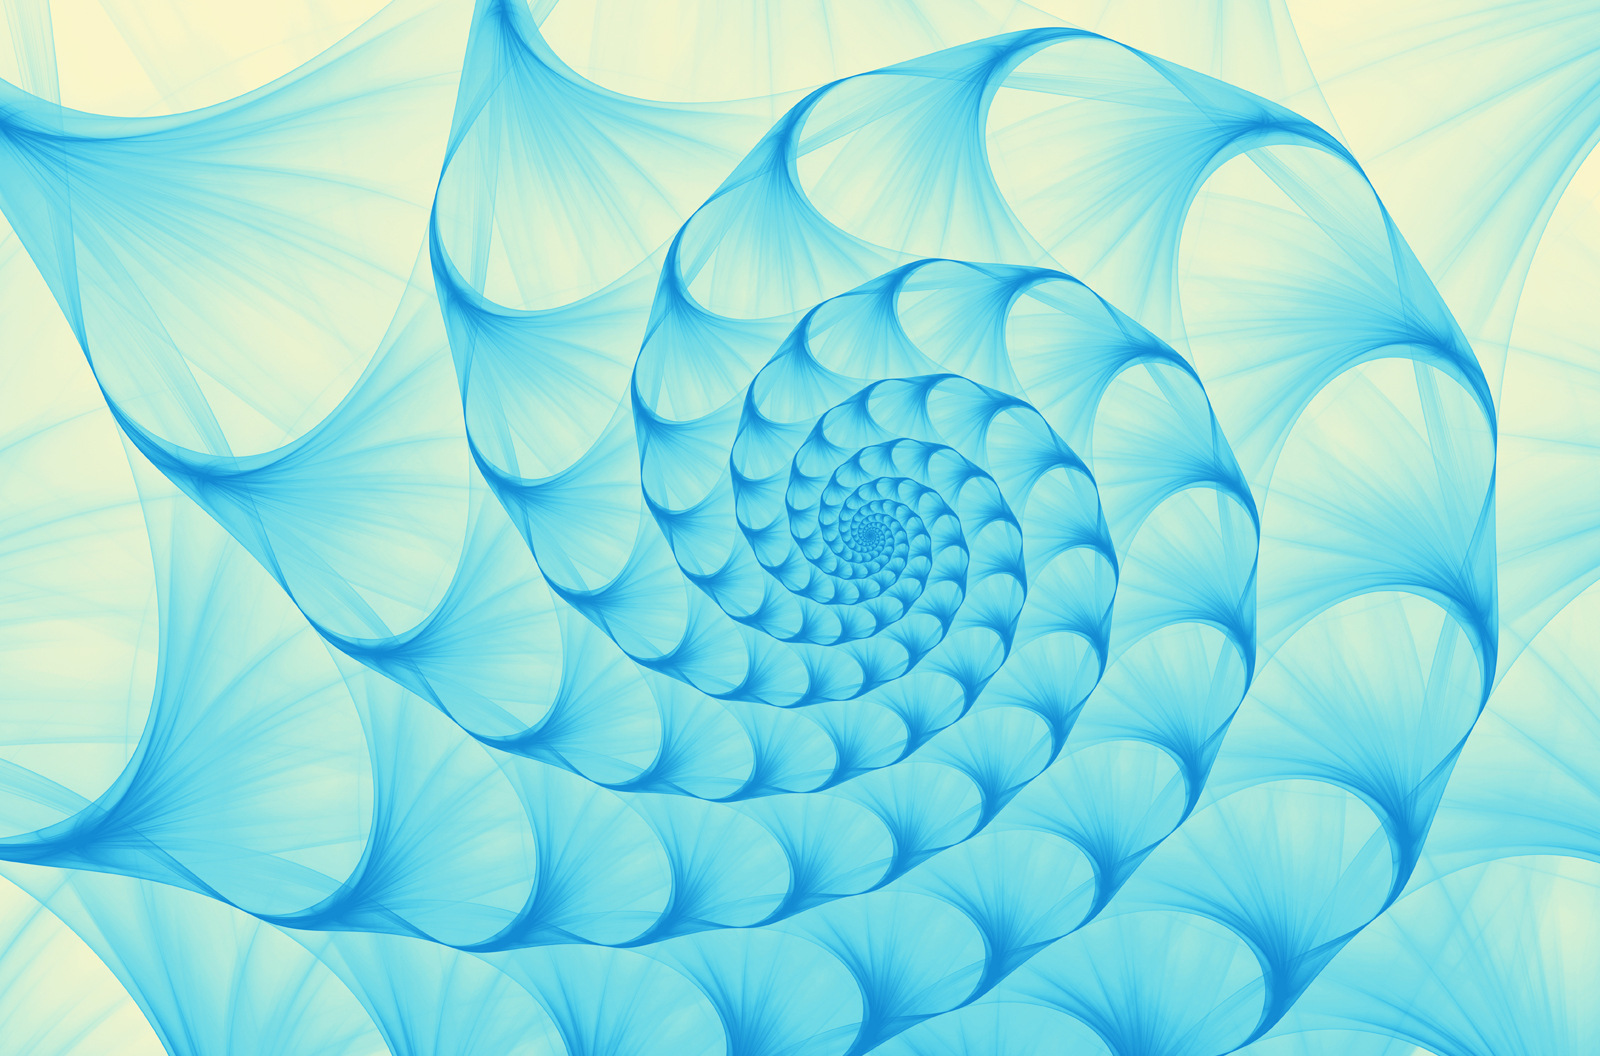 Abstract spiral-patterned sea shell with blue and light yellow pastel colors